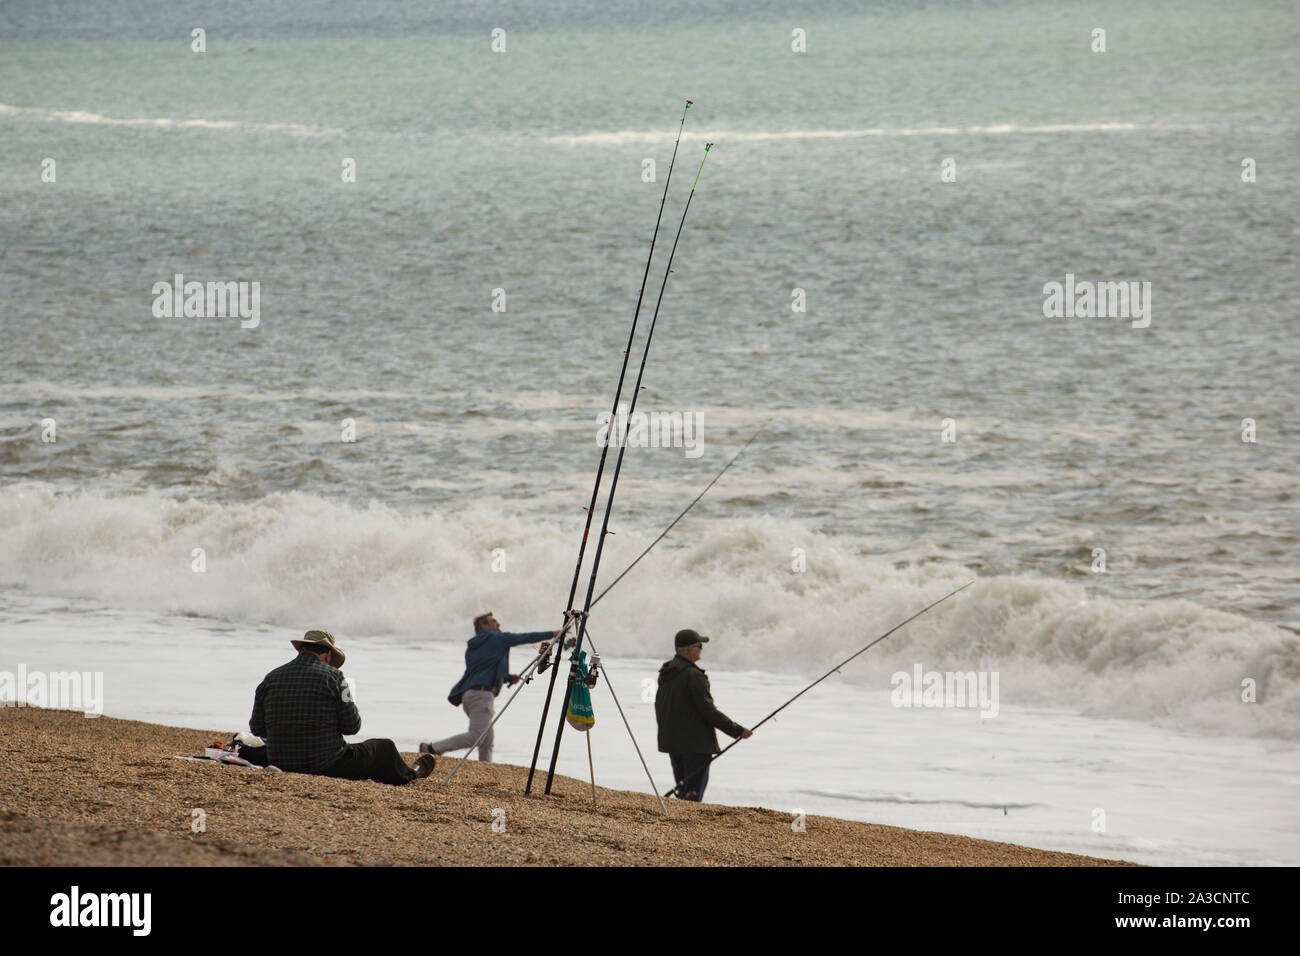 Anglers fishing on Chesil beach in October the day after a storm when the wind has dropped. Fishing after a storm can be productive as fish such as co Stock Photo